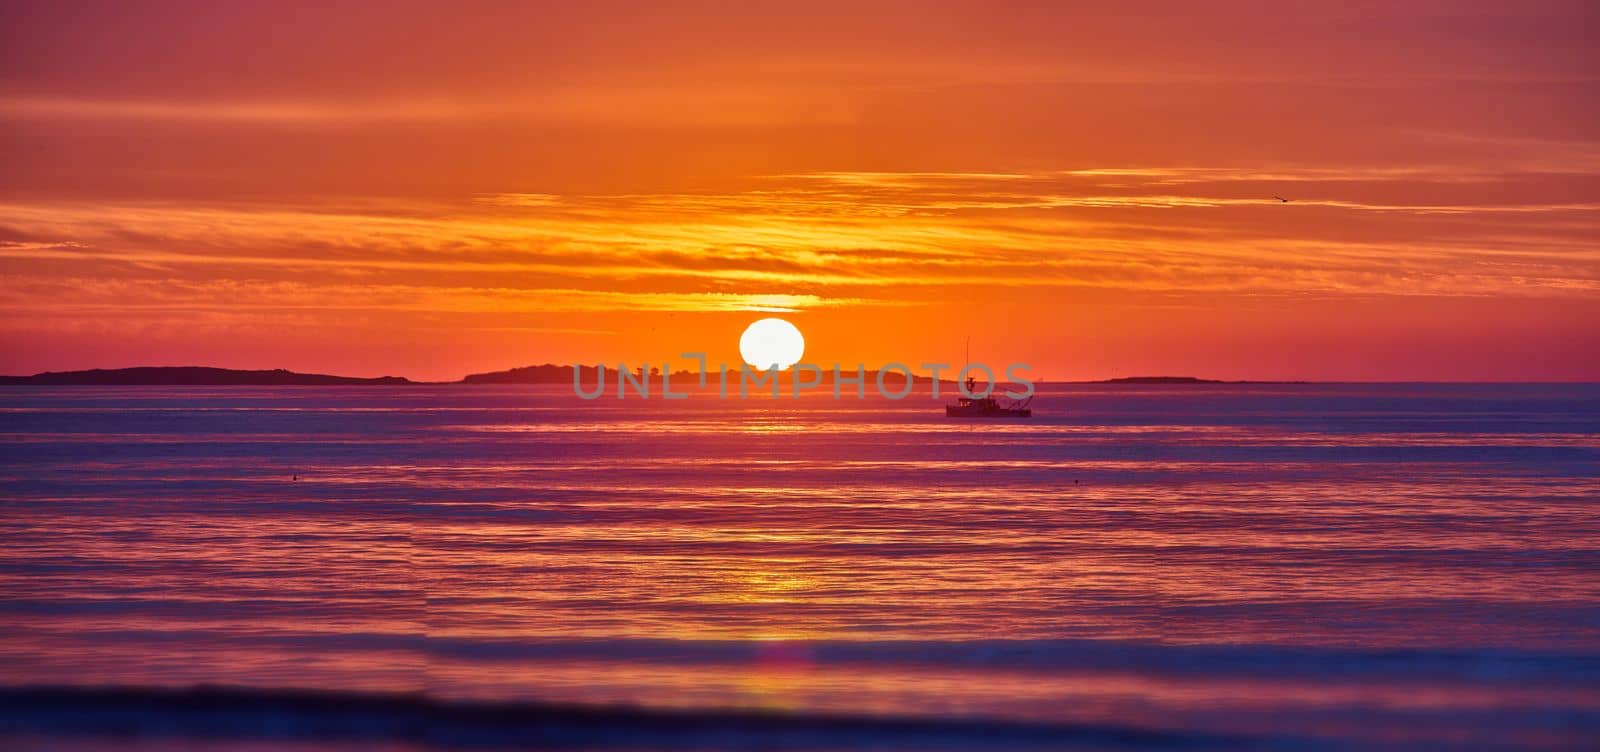 Golden light over east coast ocean with sunrise and detail of sun and fishing ship in distance by njproductions